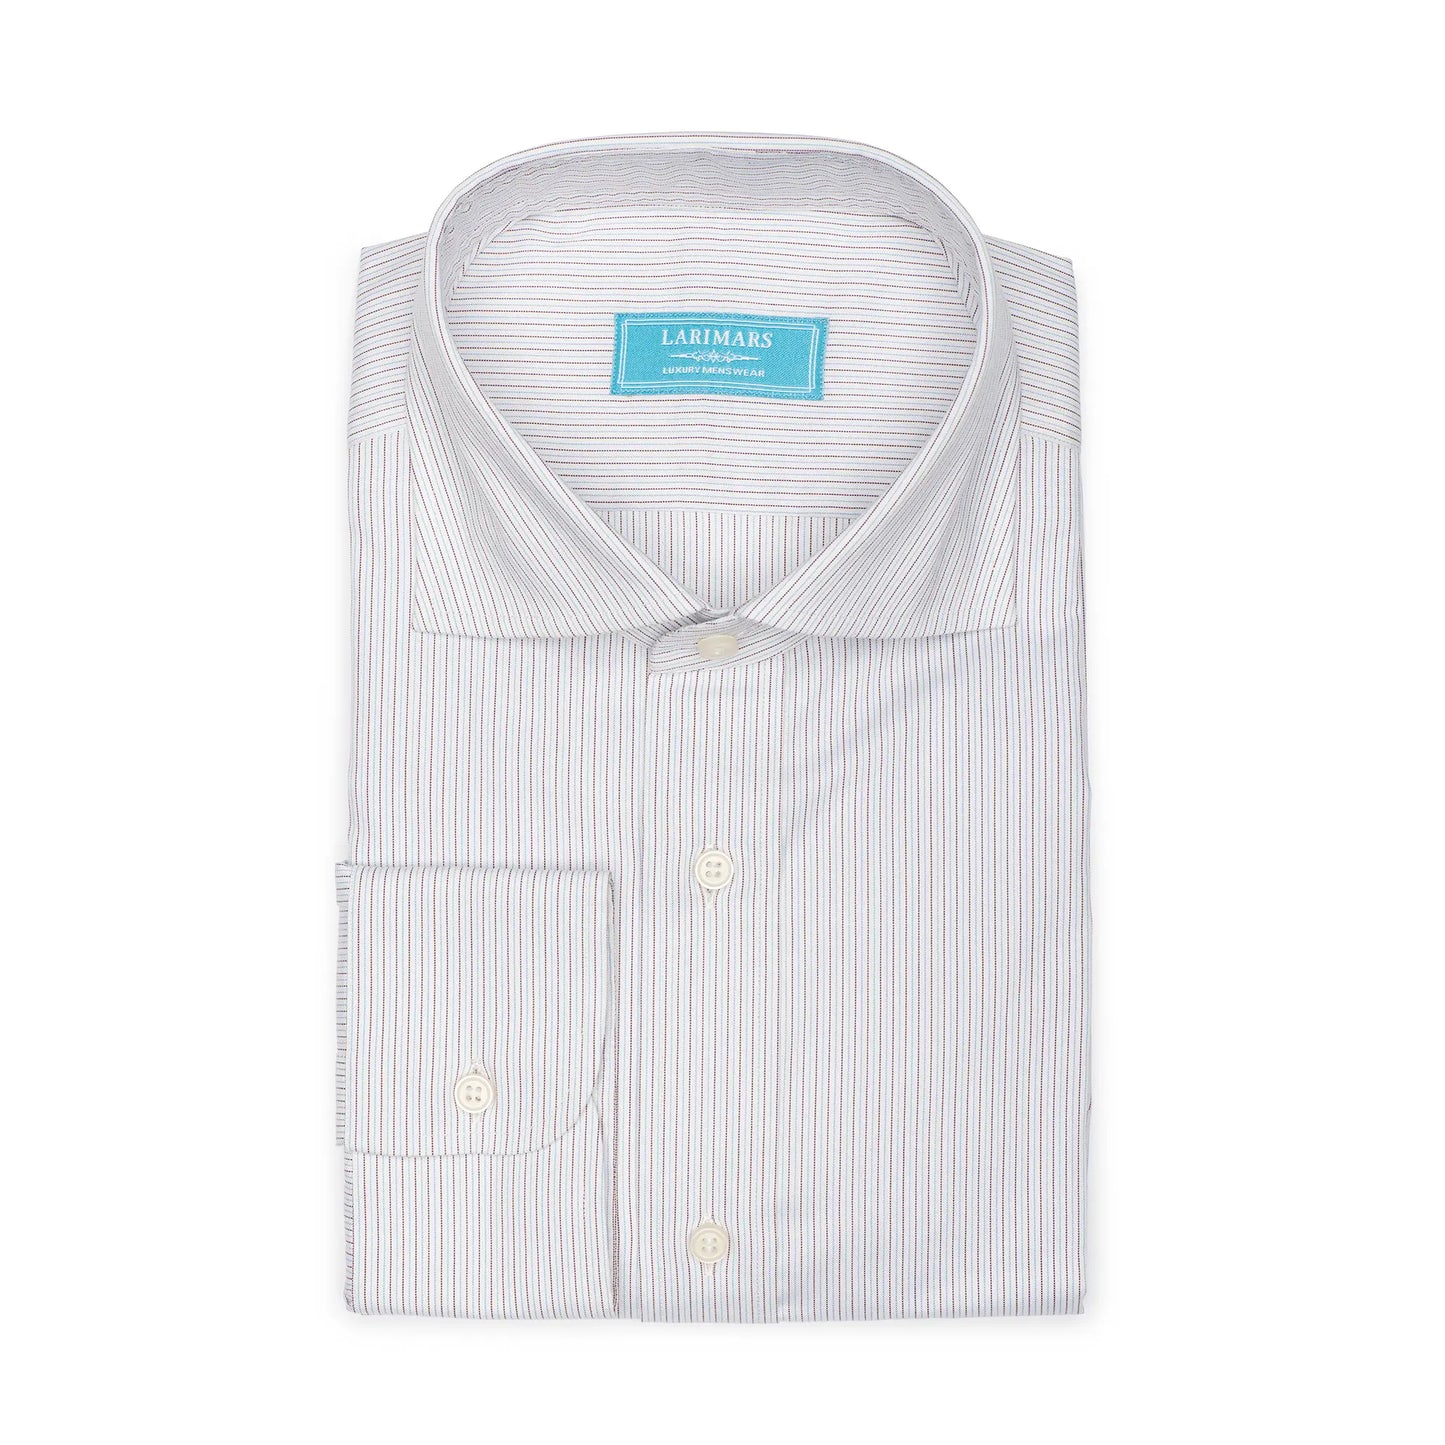 Light Blue Mix Stripe - Larimars Clothing Men's Formal and casual wear shirts